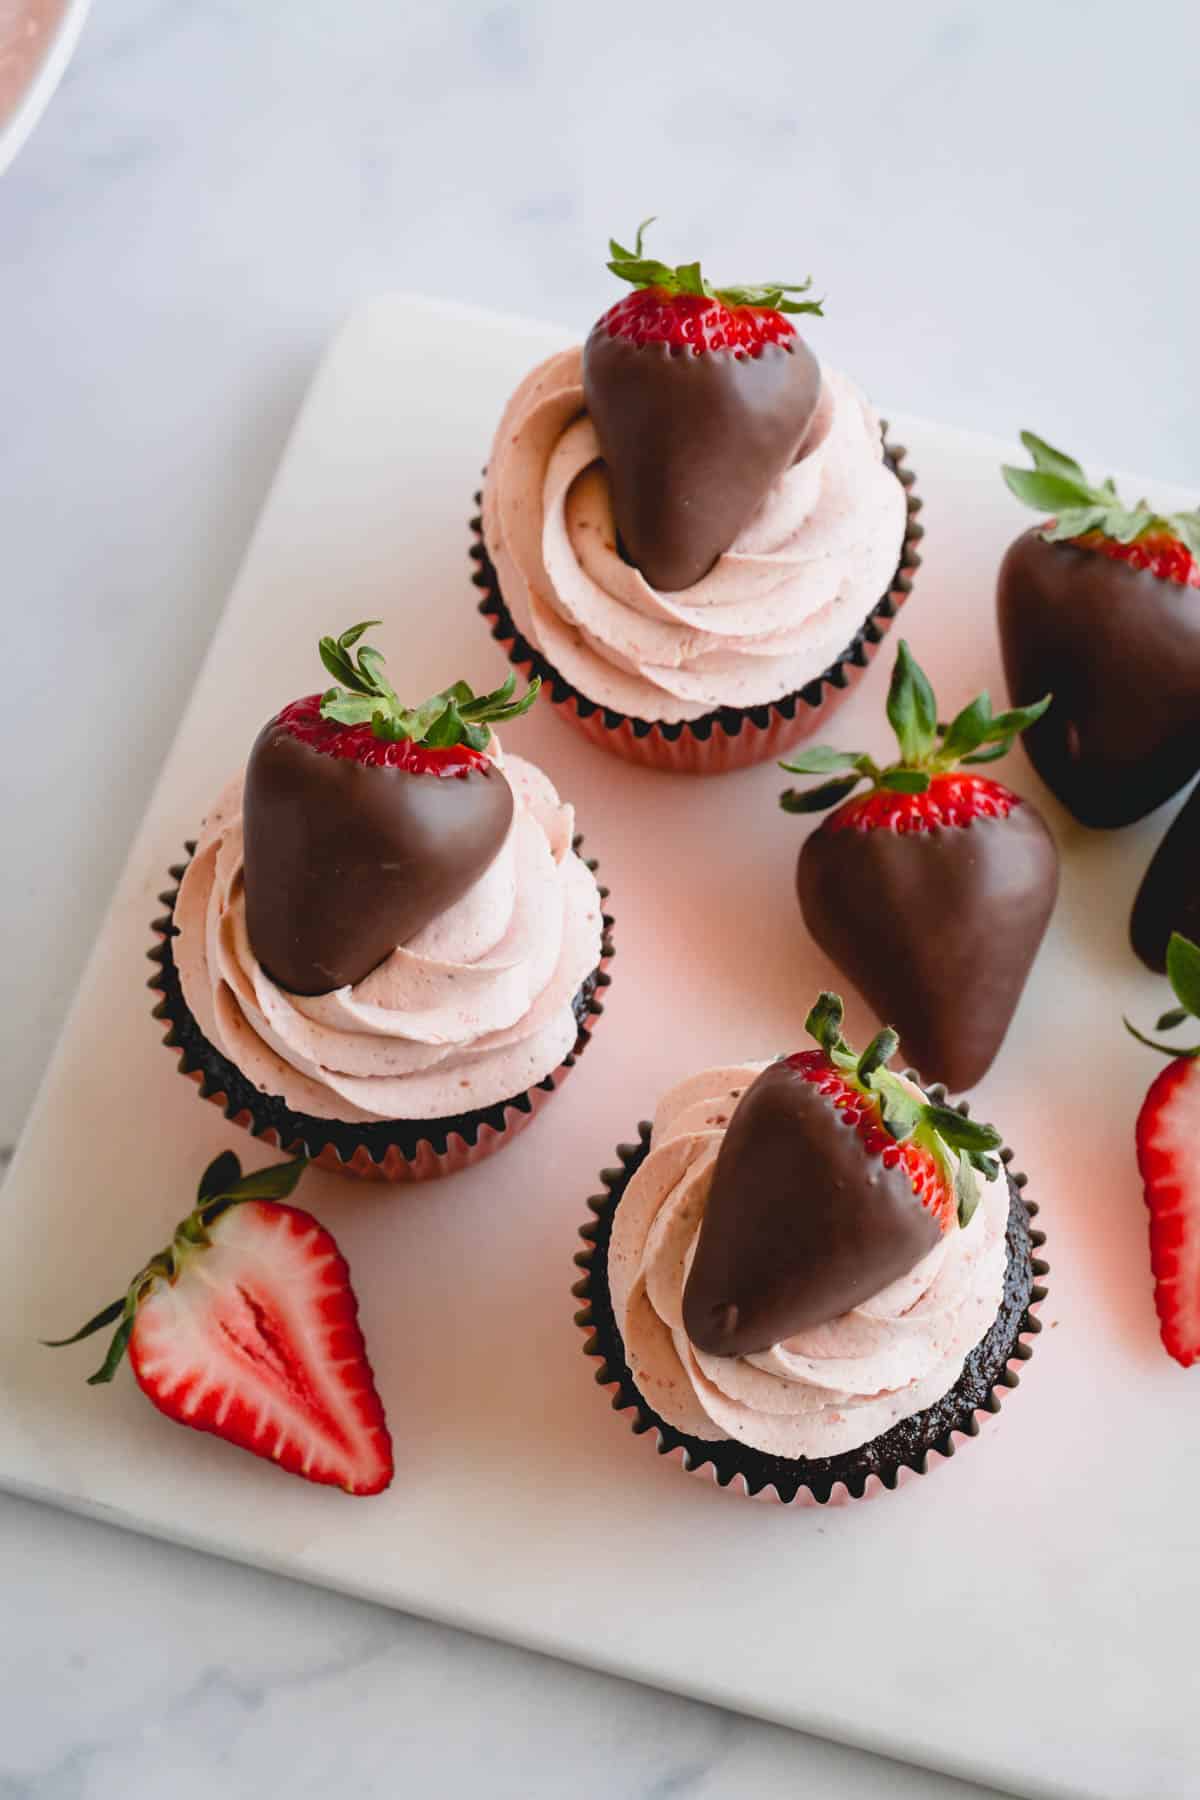 Three strawberry chocolate cupcakes topped with chocolate covered strawberries.